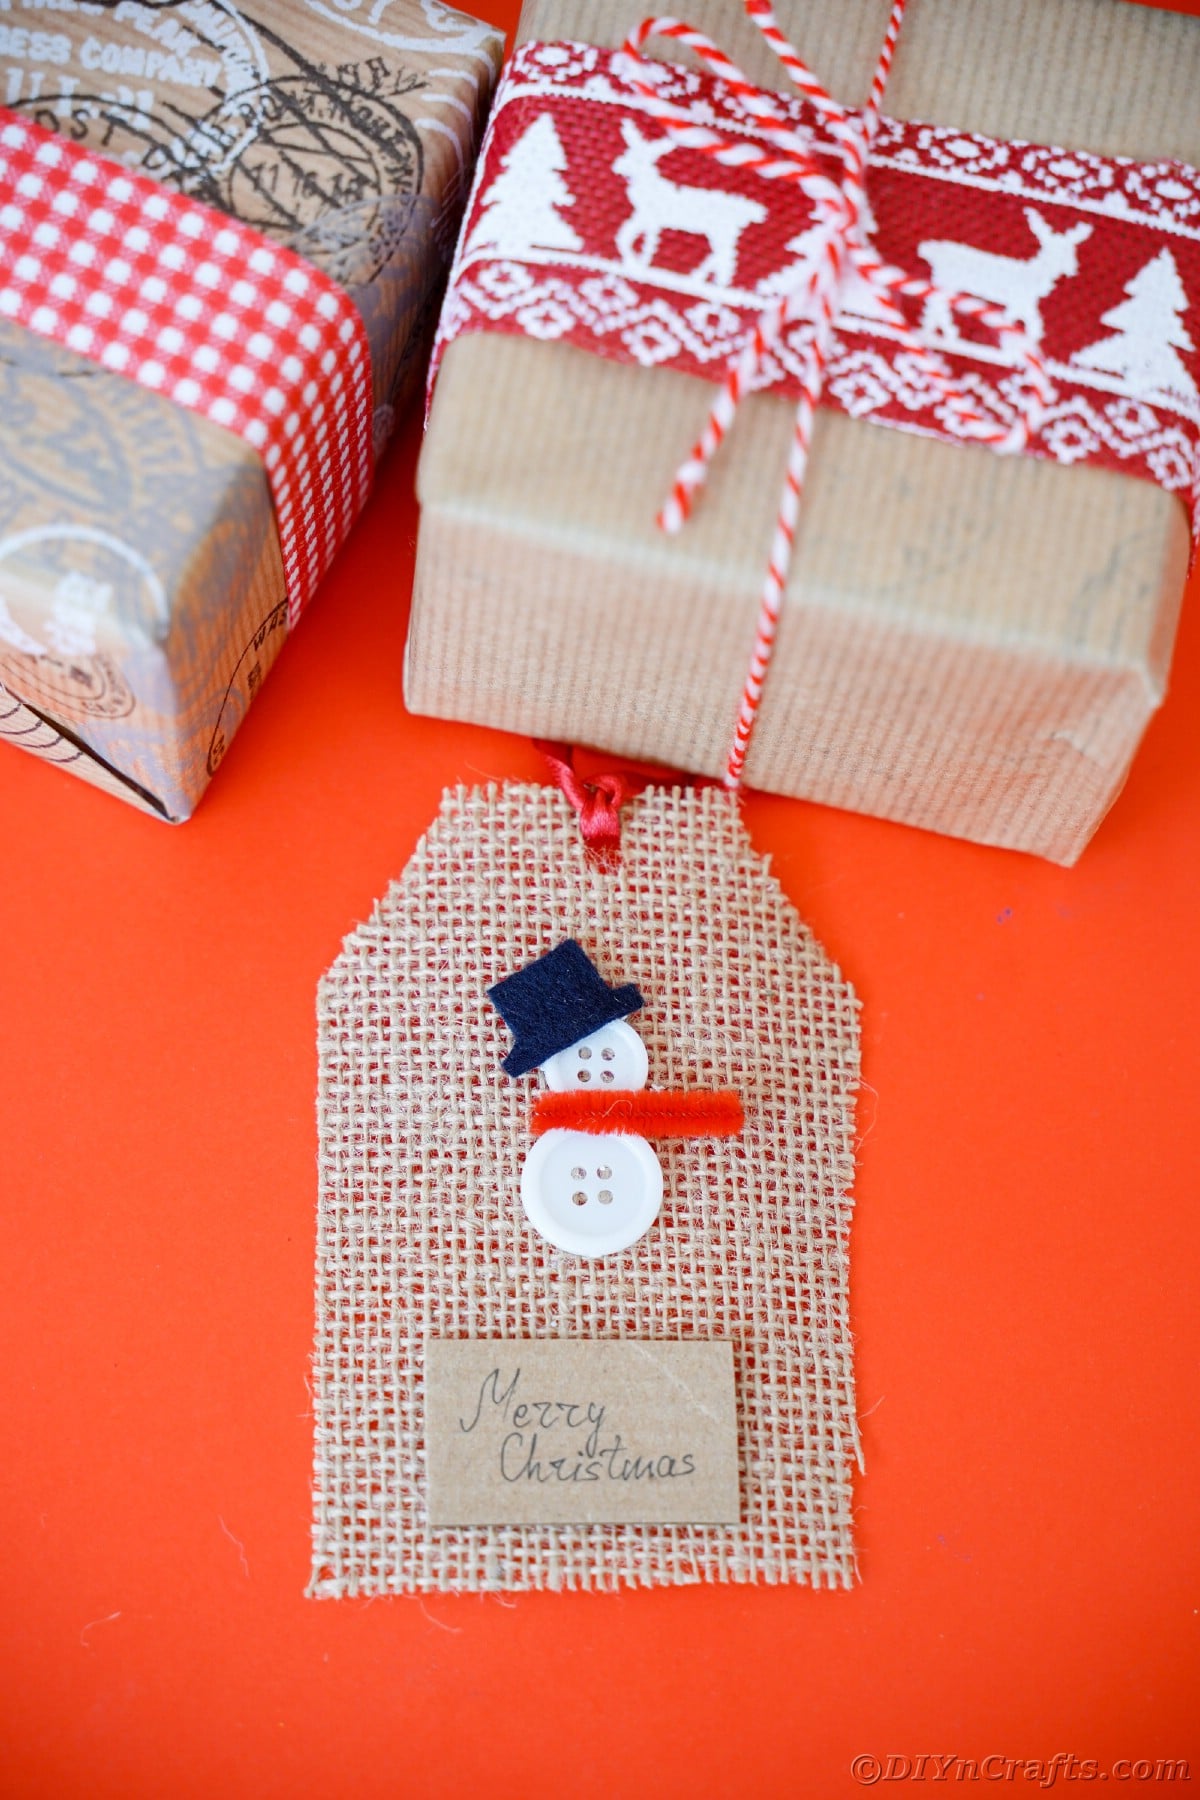 snowman gift tag laying on red table by brown gift